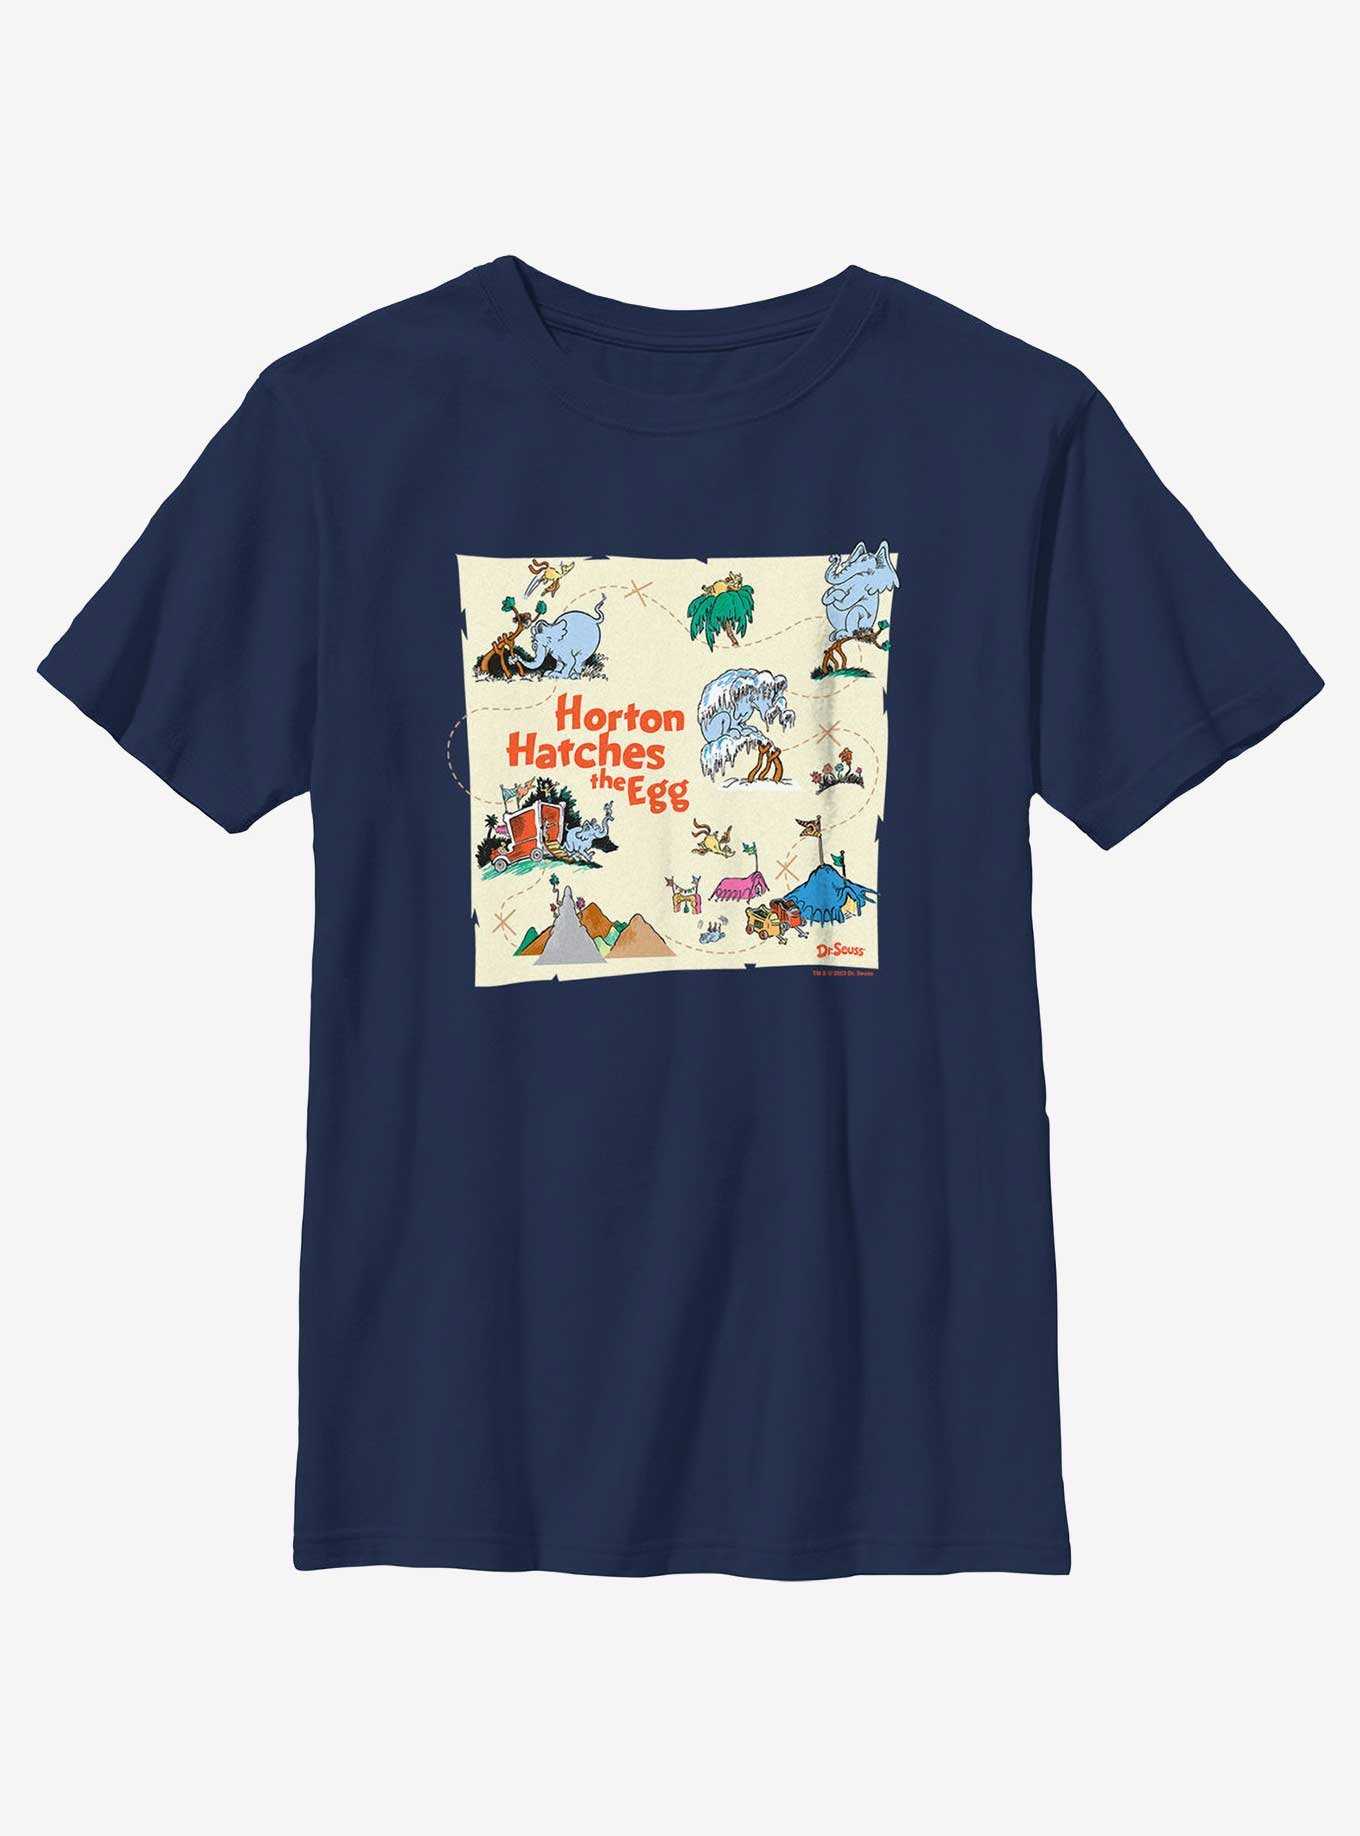 Dr. Seuss's Horton Hatches The Egg Map Youth T-Shirt, , hi-res